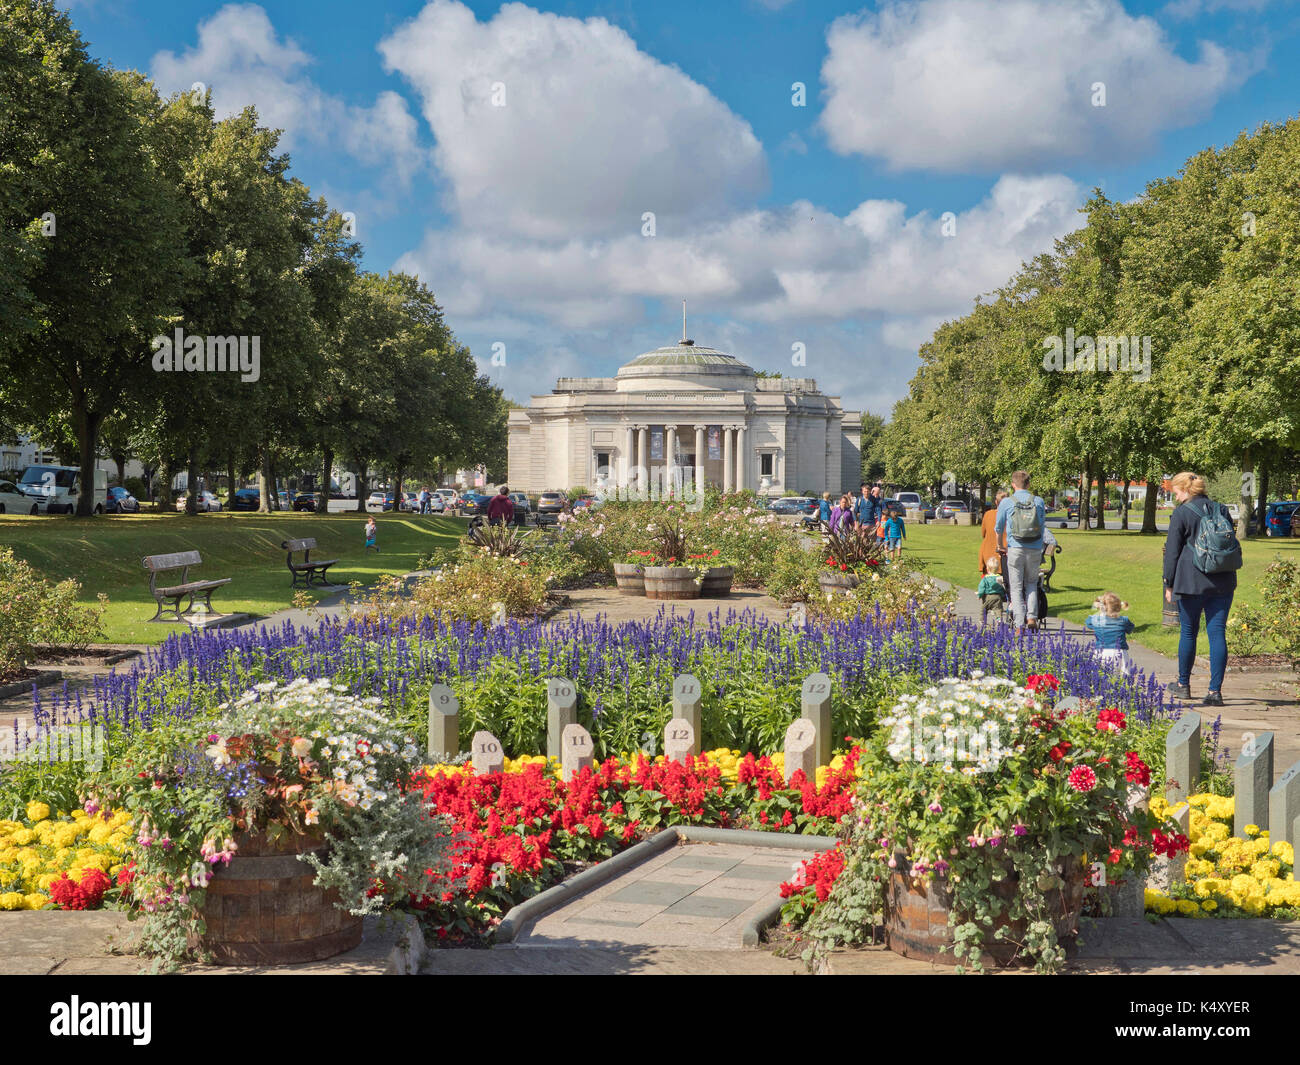 Port Sunlight Village, Wirral, showing floral displays and Lady Lever Art Gallery. Stock Photo